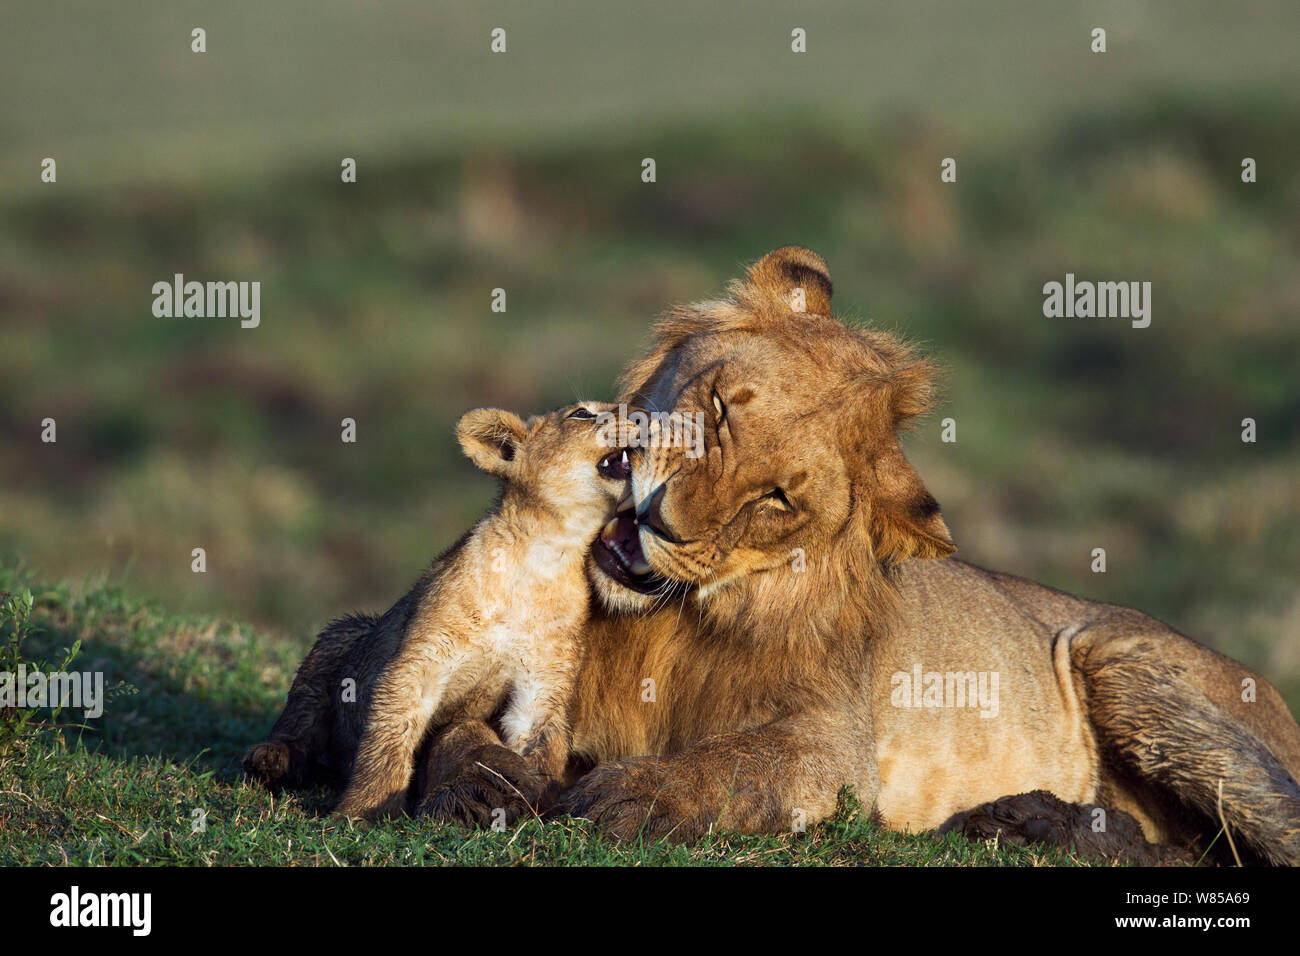 Lion (Panthera leo) adolescent male playing with cub aged 3-6 months. Masai Mara National Reserve, Kenya, September Stock Photo